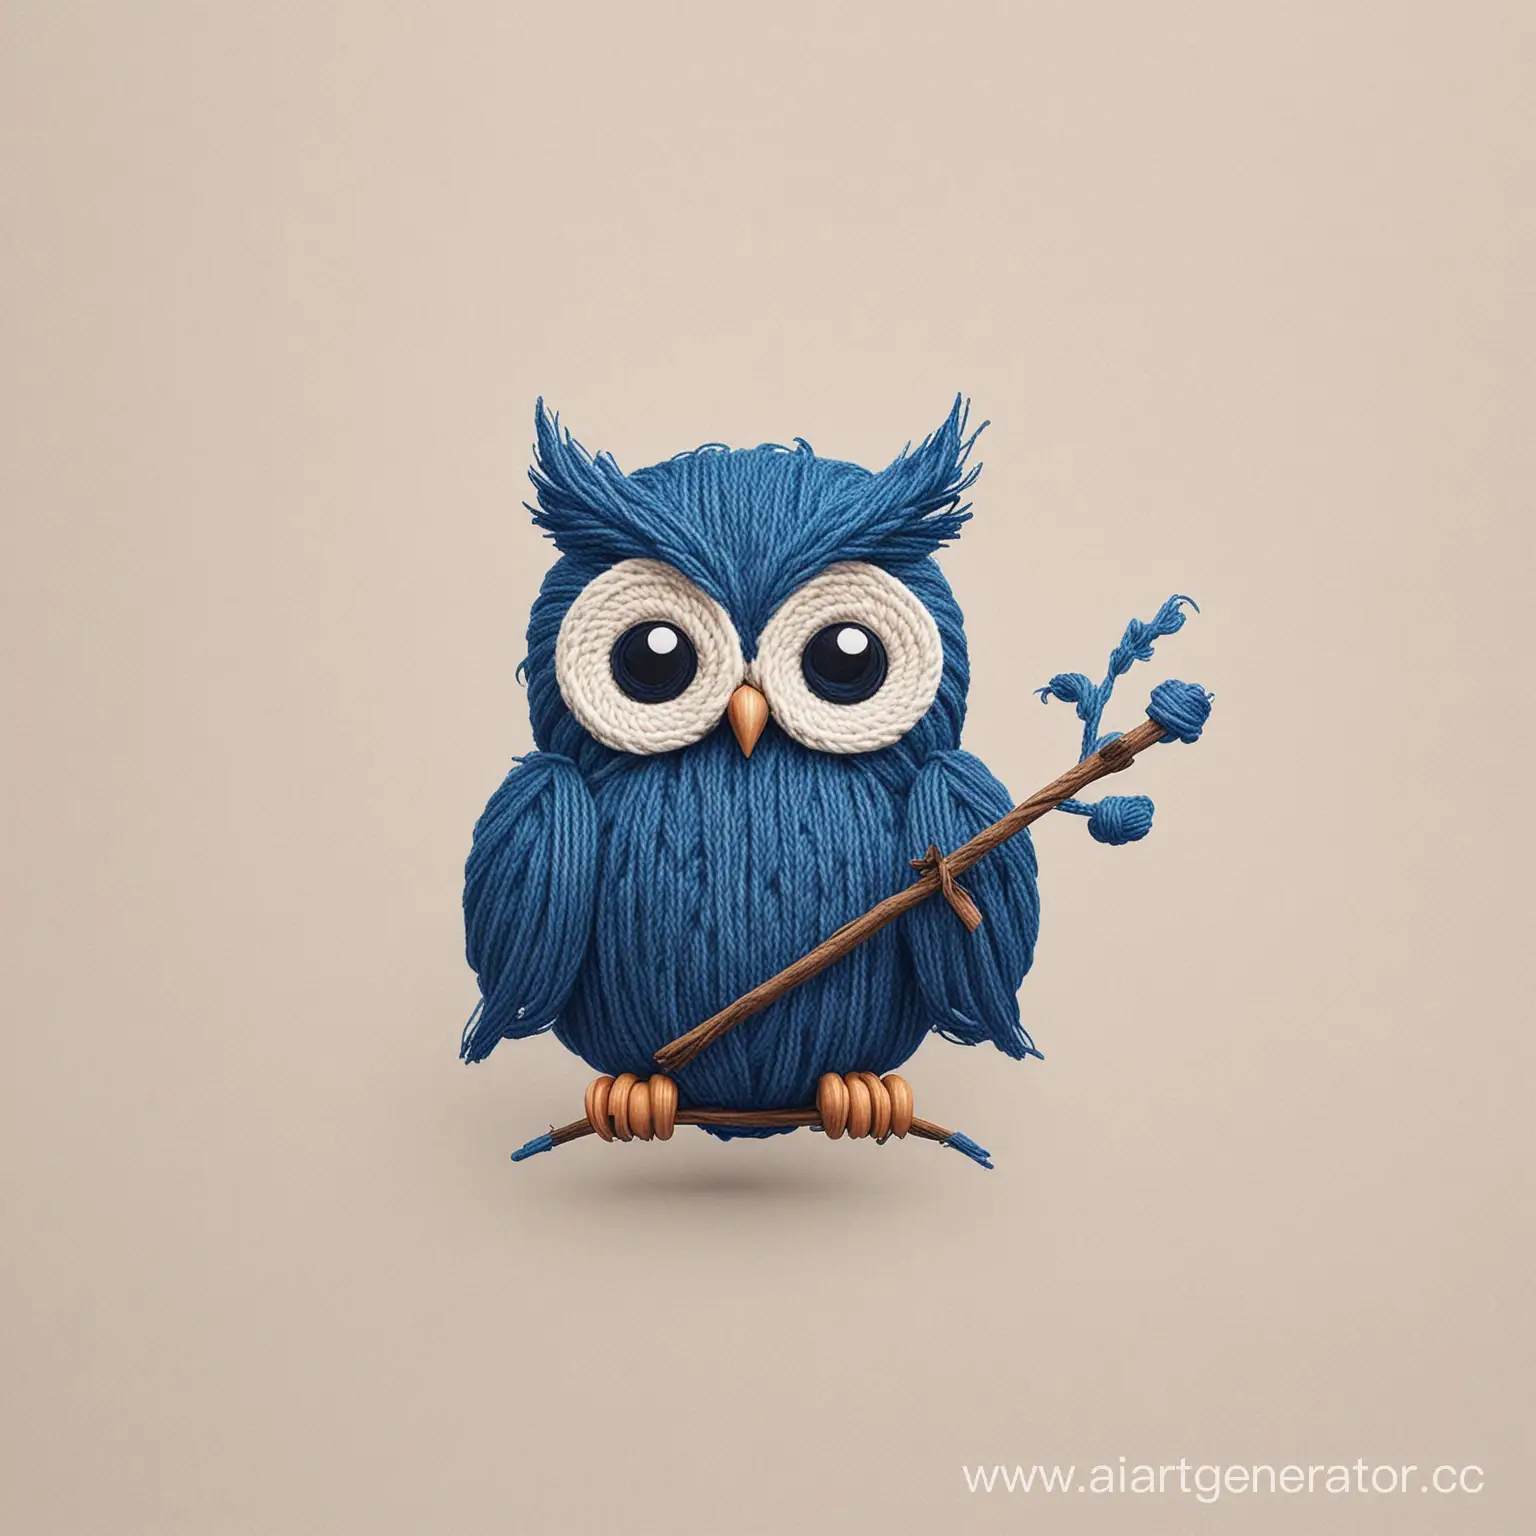 Minimalist-Owl-Logo-Design-with-Blue-Threads-and-Knitting-Needles